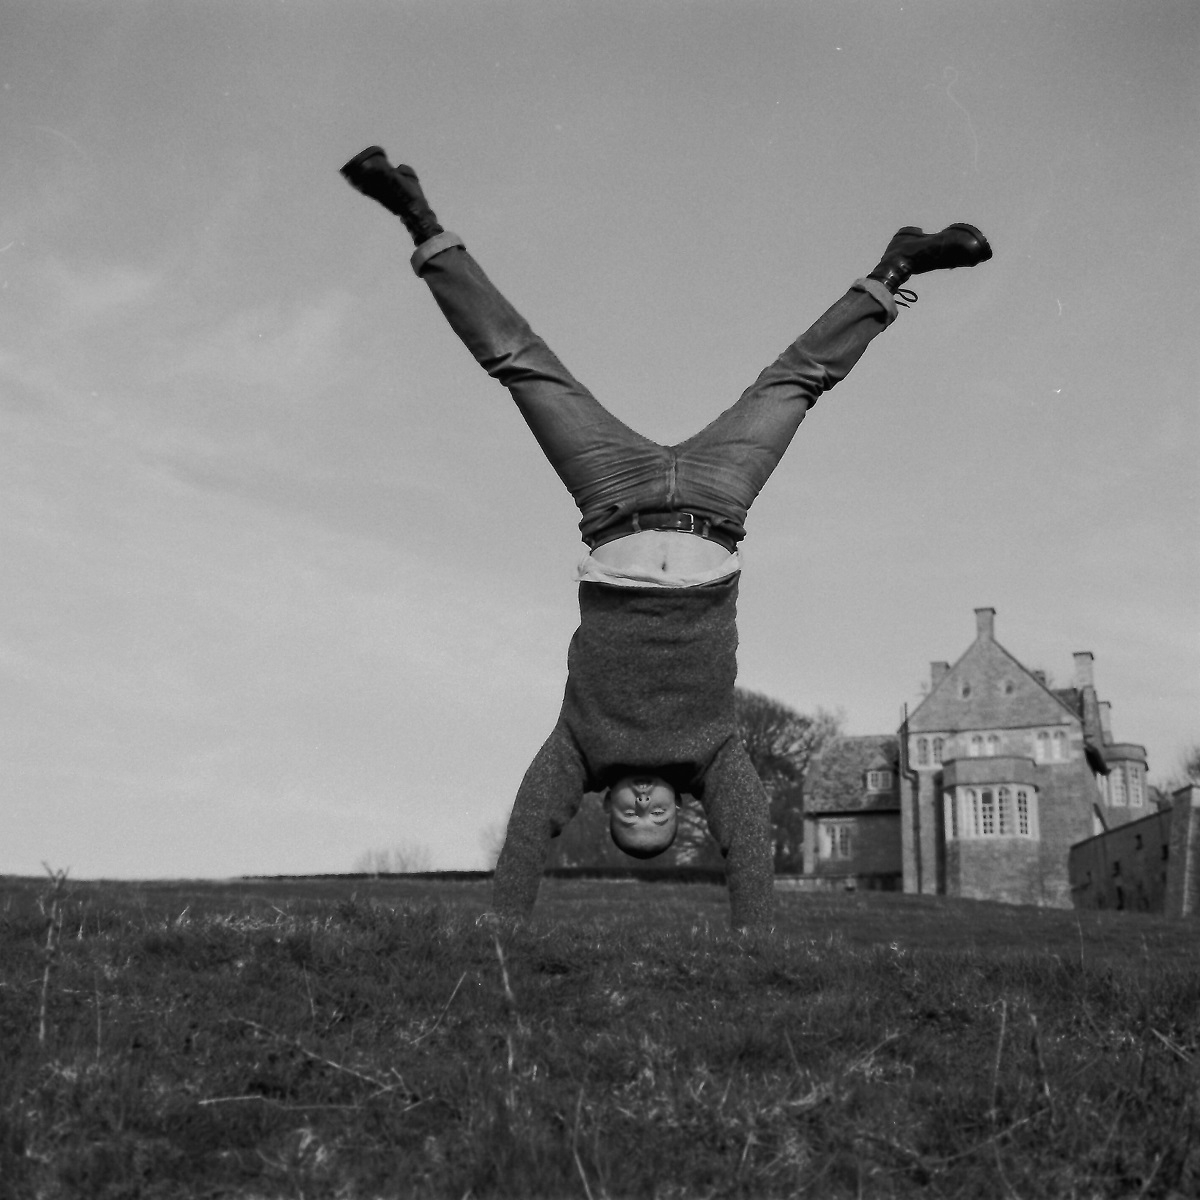 McQueen doing a handstand at Hilles - Isabella Blows home 